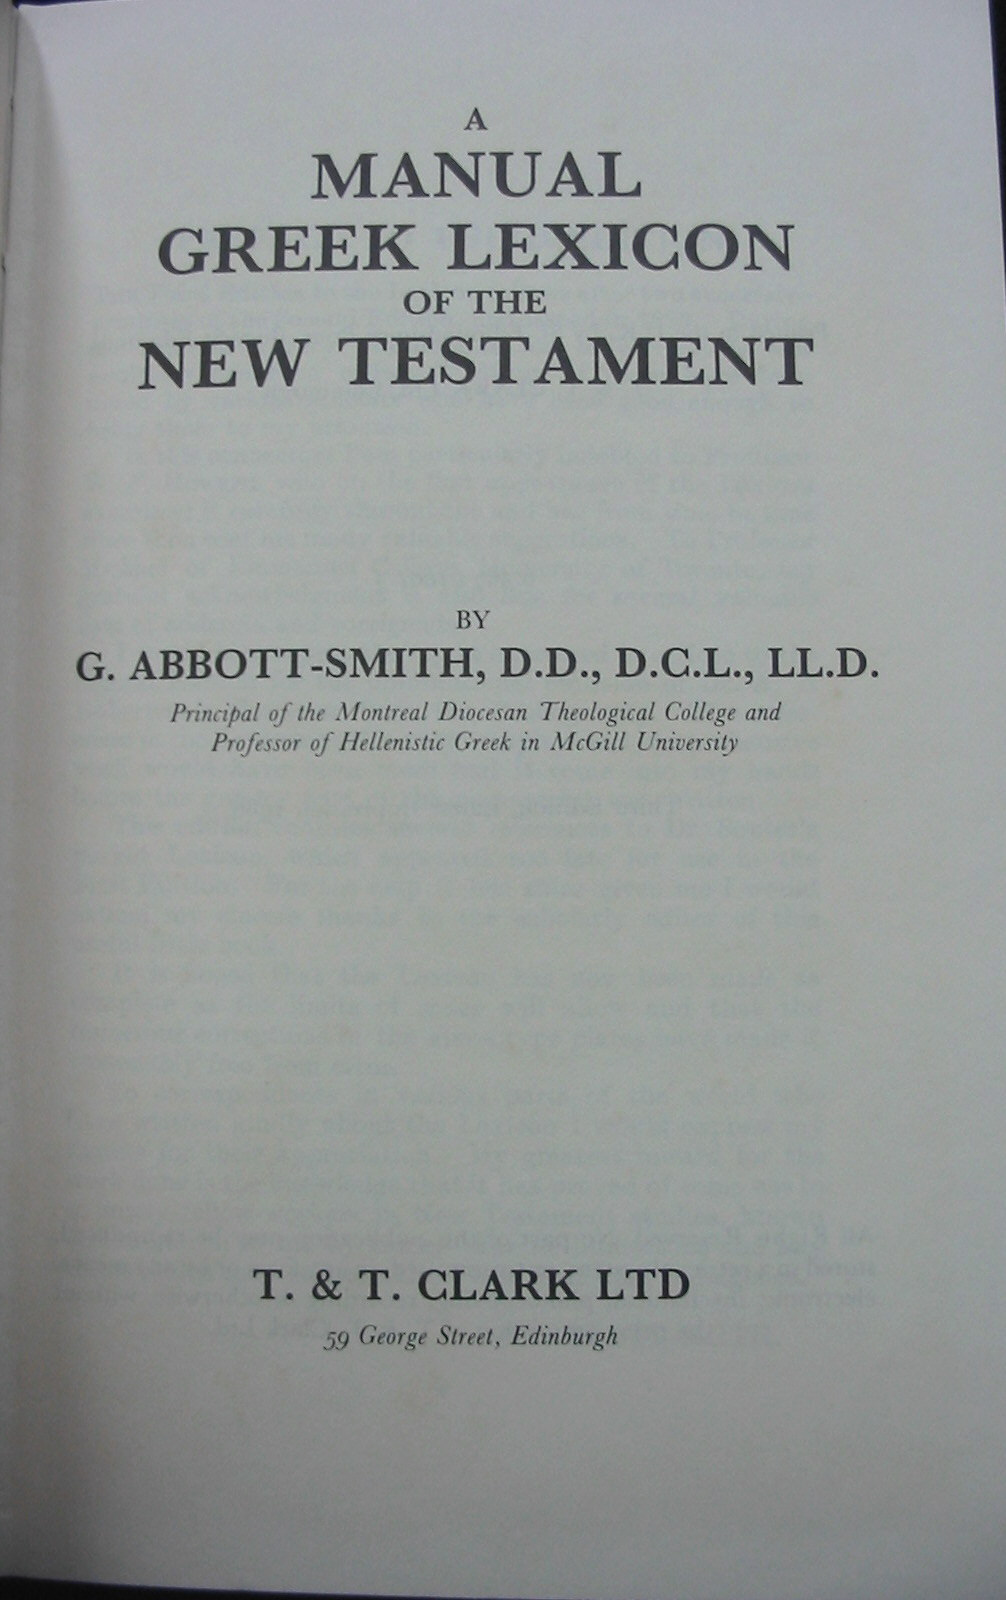 [A+manual+Greek+Lexicon+of+the+New+Testament.jpg]